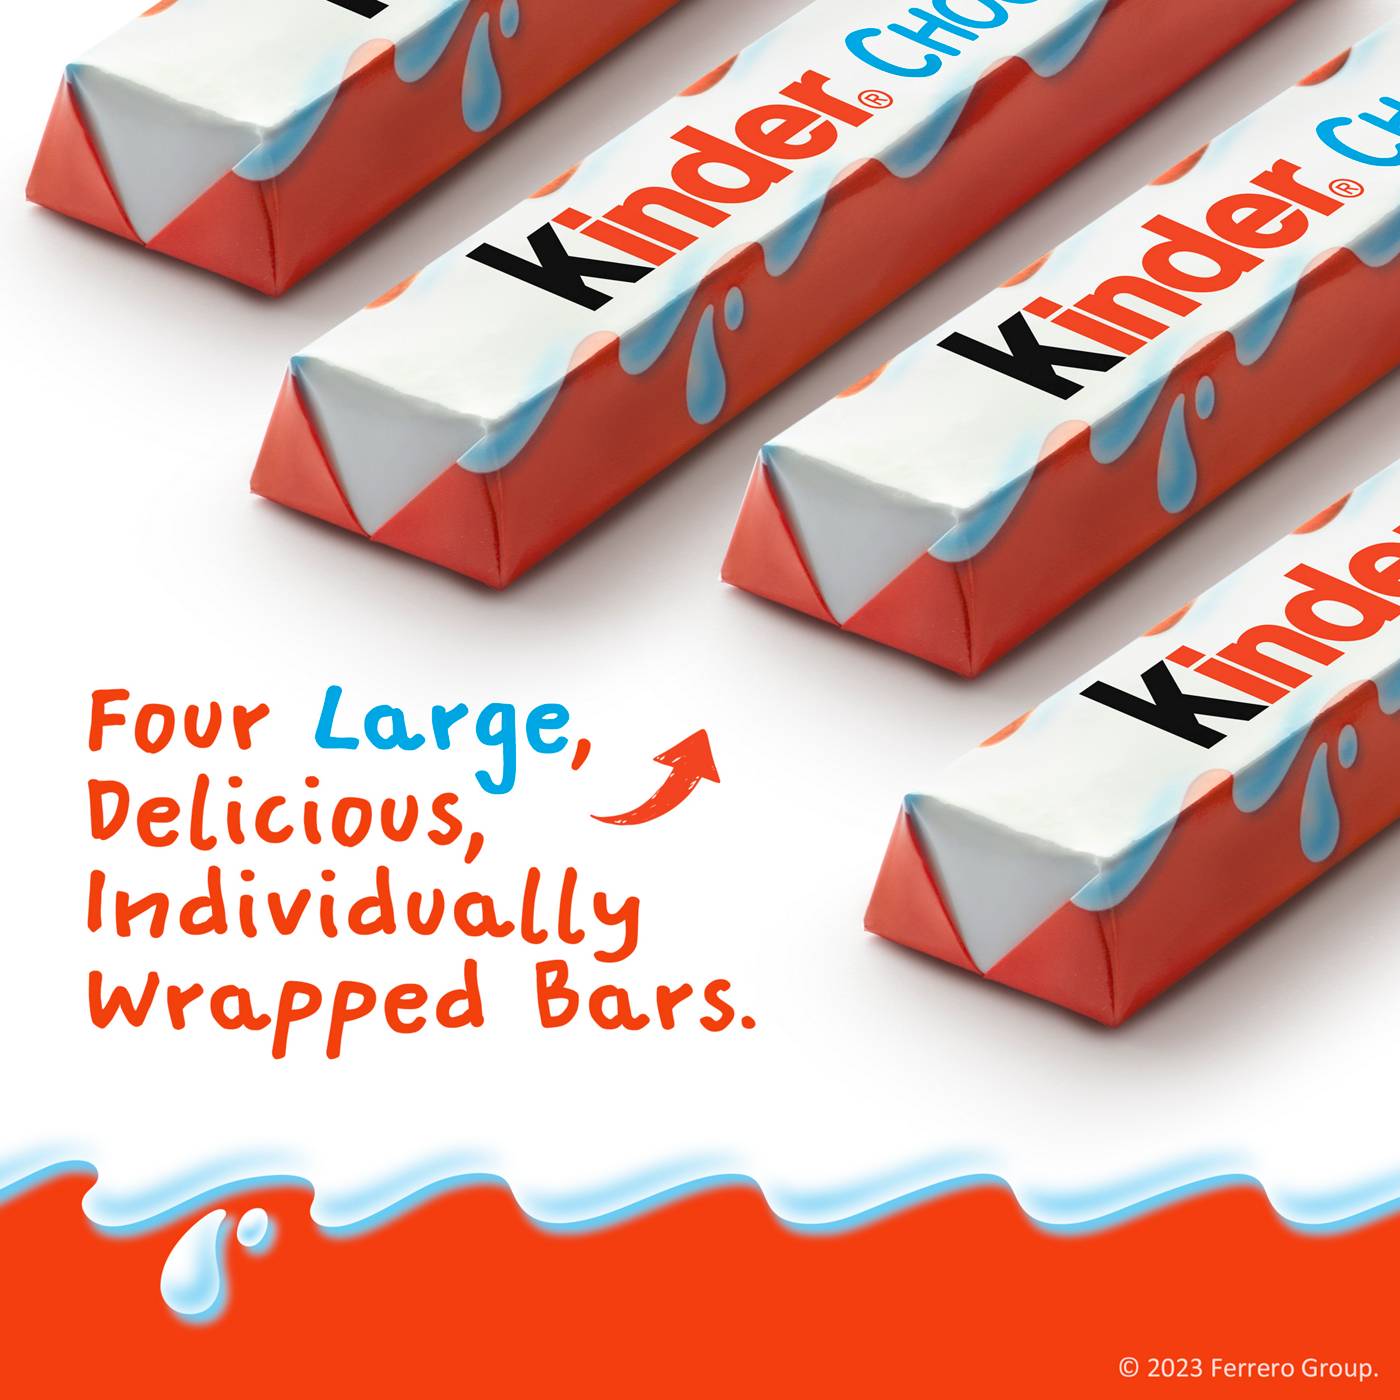 Kinder Chocolate with Creamy Milky Filling Candy Bars - King Size; image 2 of 5